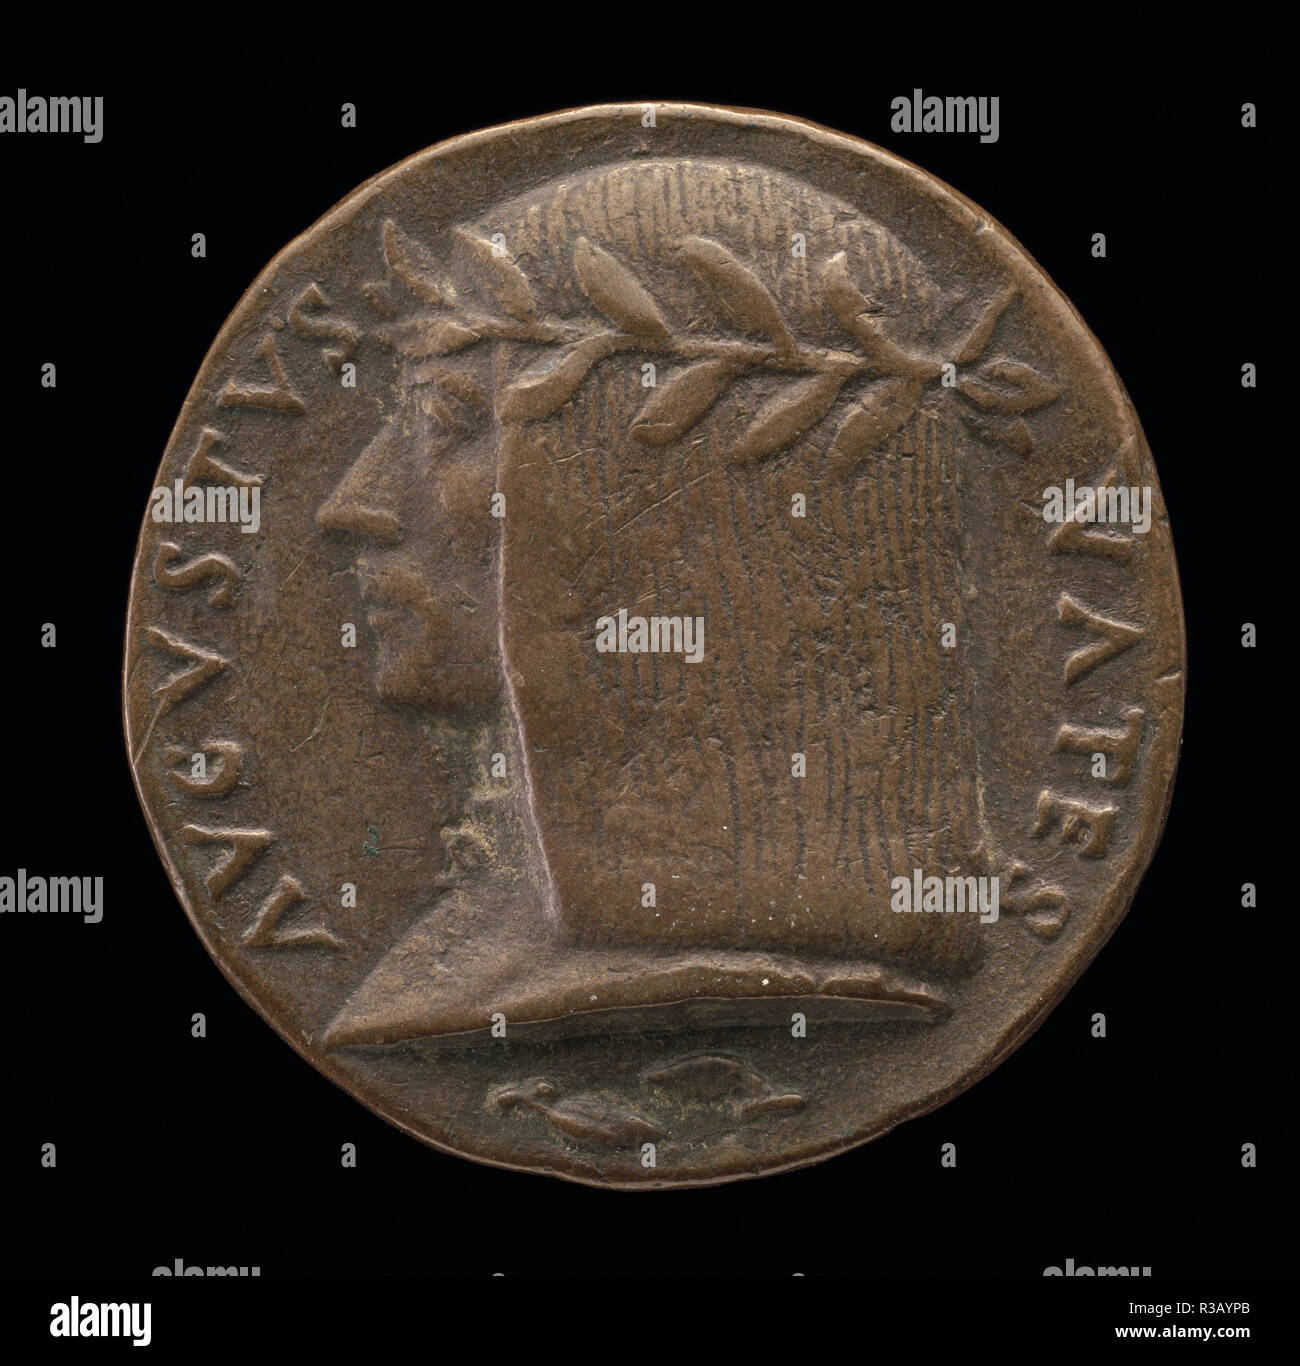 Augusto da Udine (Publio Augusto Graziani), Poet and Astrologer [obverse]. Dated: c. 1519. Dimensions: overall (diameter): 3.21 cm (1 1/4 in.)  gross weight: 15.56 gr (0.034 lb.)  axis: 6:00. Medium: bronze. Museum: National Gallery of Art, Washington DC. Author: Maffeo Olivieri. Stock Photo